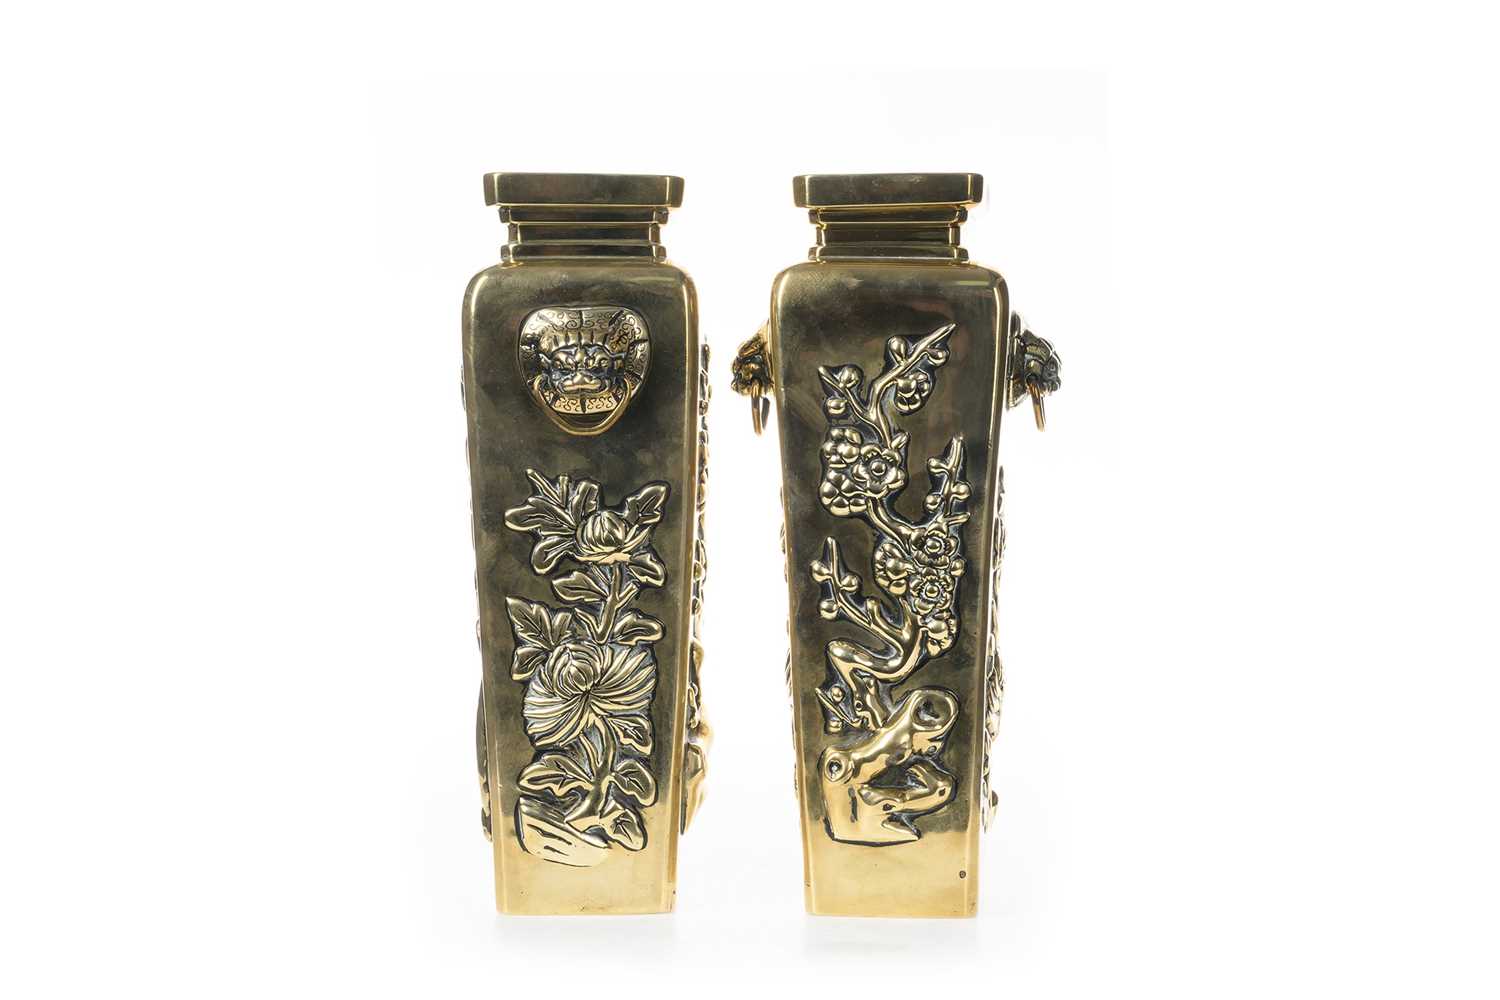 PAIR OF CHINESE BRASS VASES, EARLY 20TH CENTURY